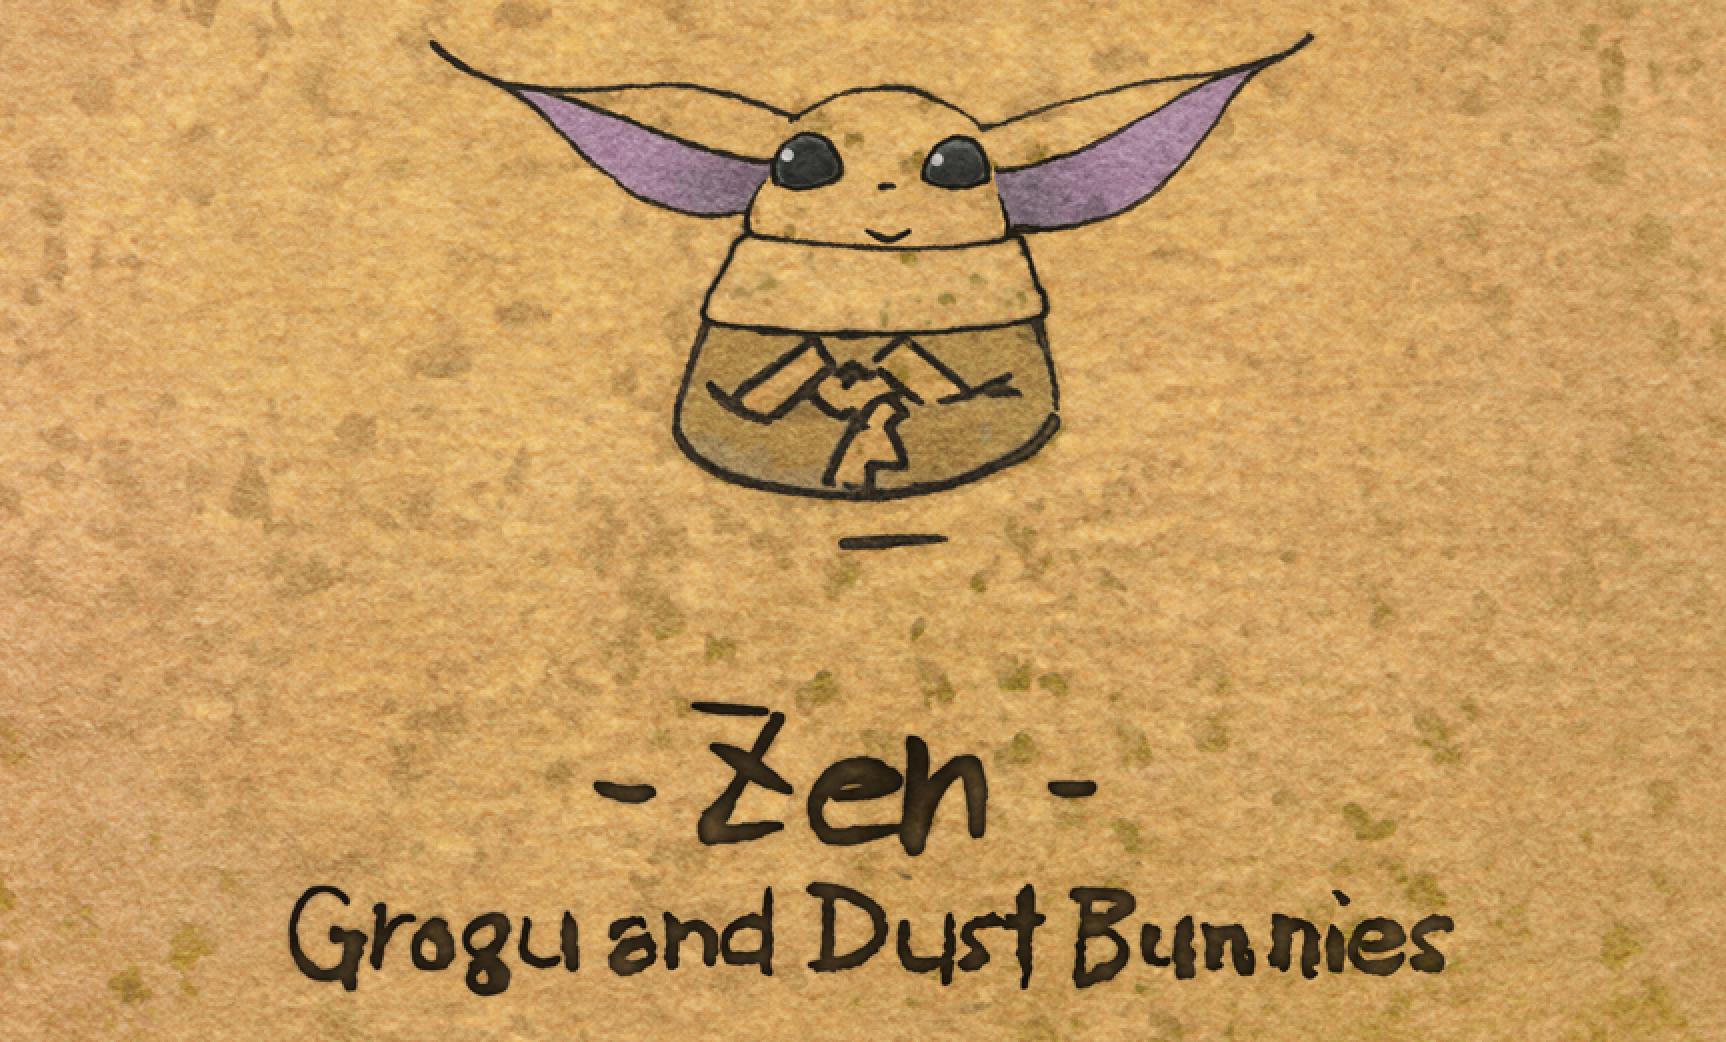 Disney+ To Feature A New Short Film Based On The Zen Story of Grogu, Dust Bunnies, And Other Misfit Objects